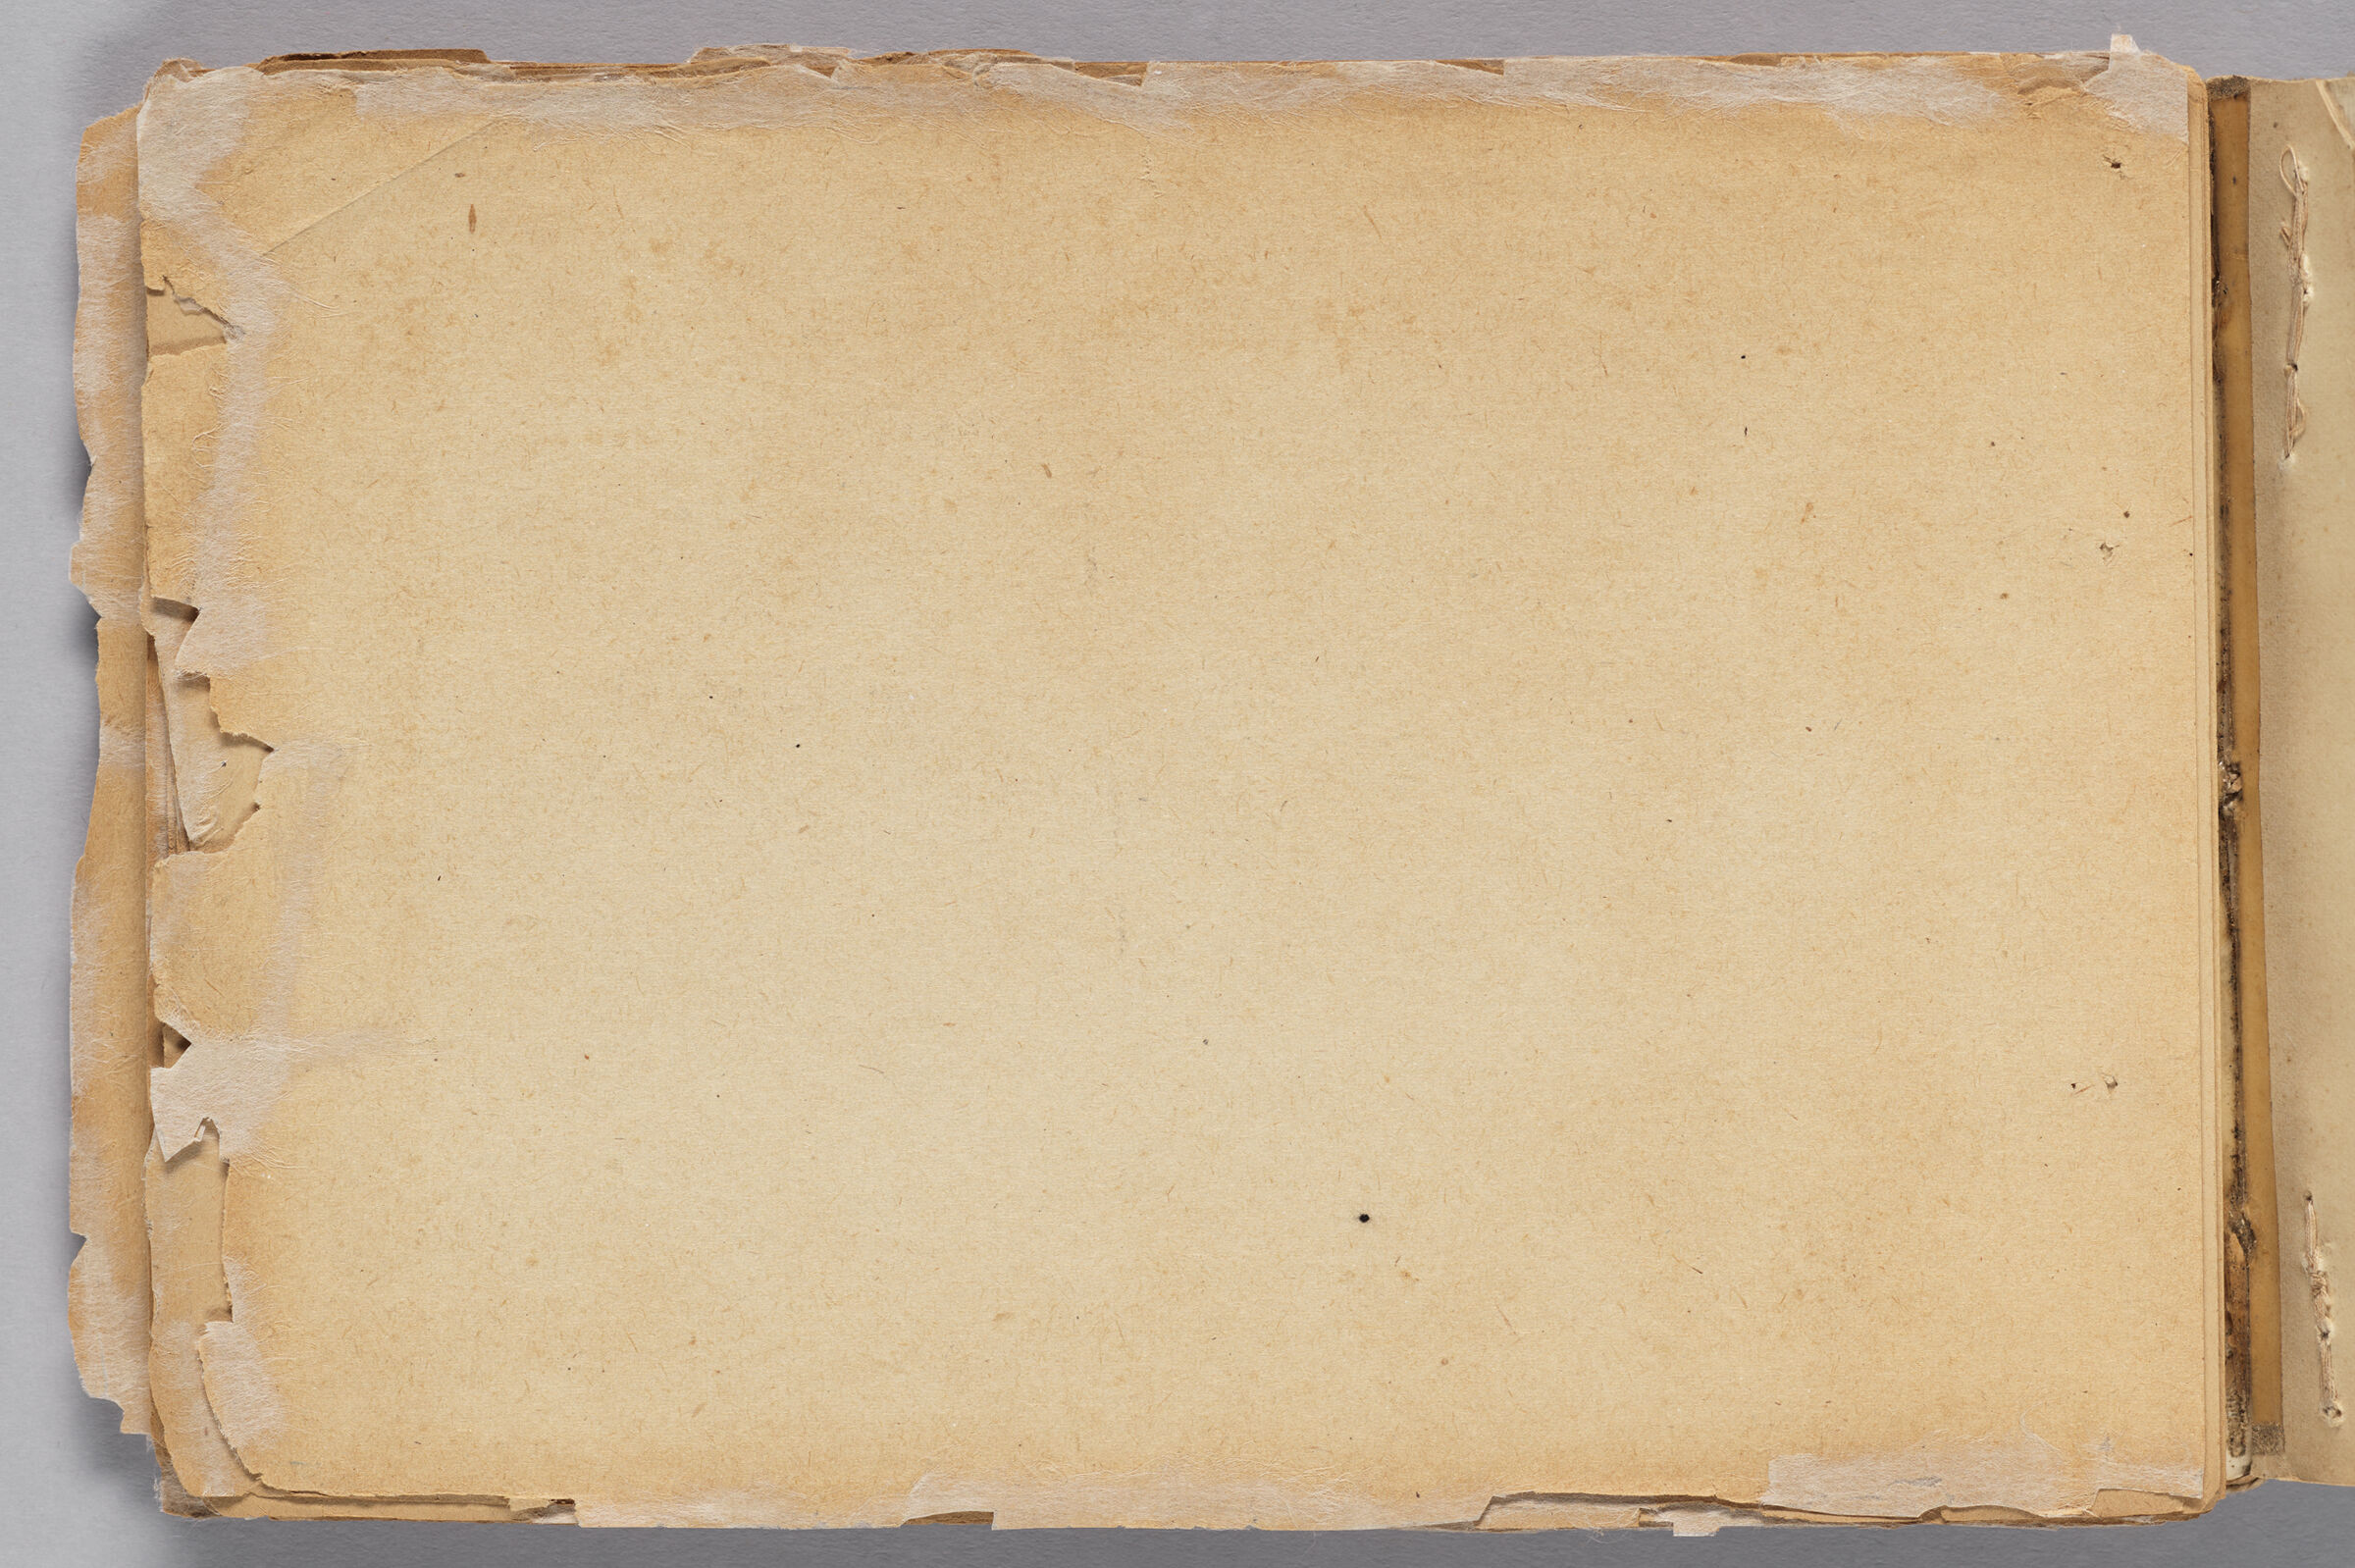 Untitled (Blank With Stray Marks, Left Page); Untitled (Blank Back Endpaper, Right Page)